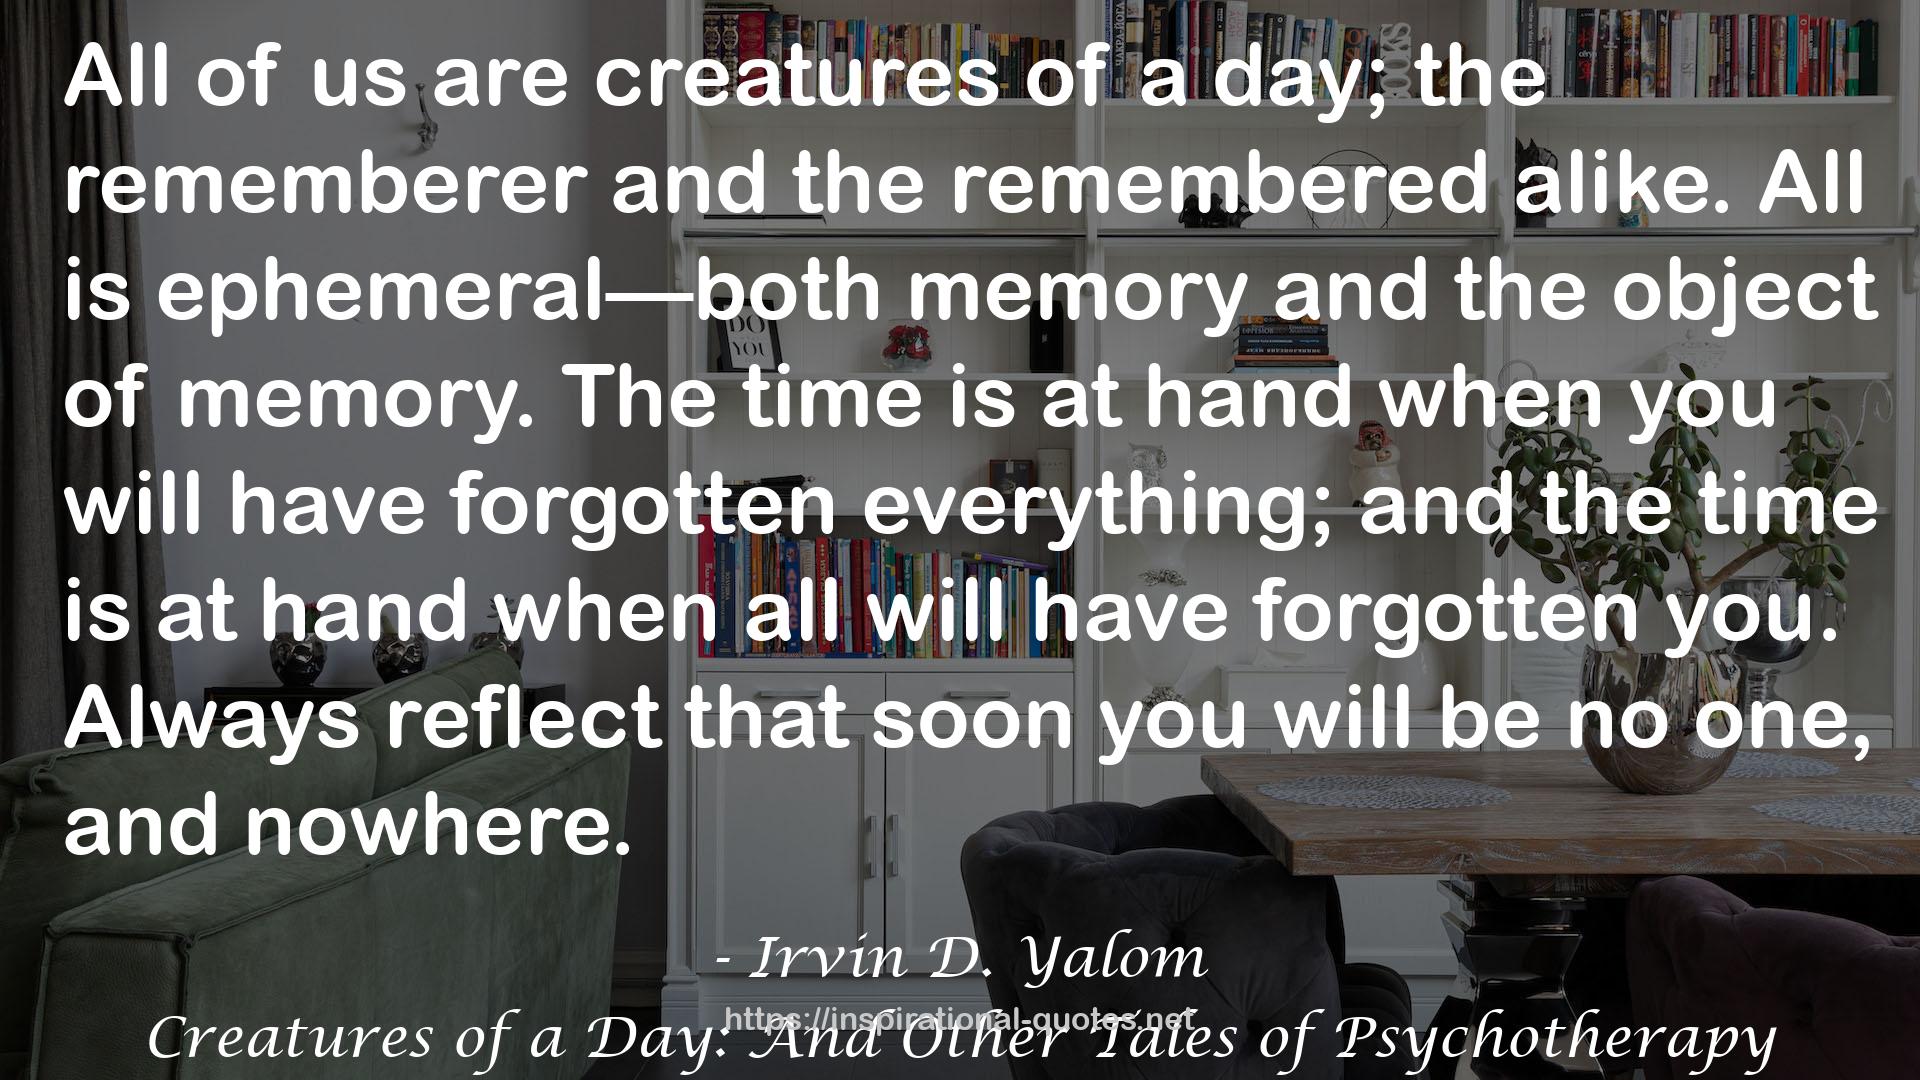 Creatures of a Day: And Other Tales of Psychotherapy QUOTES